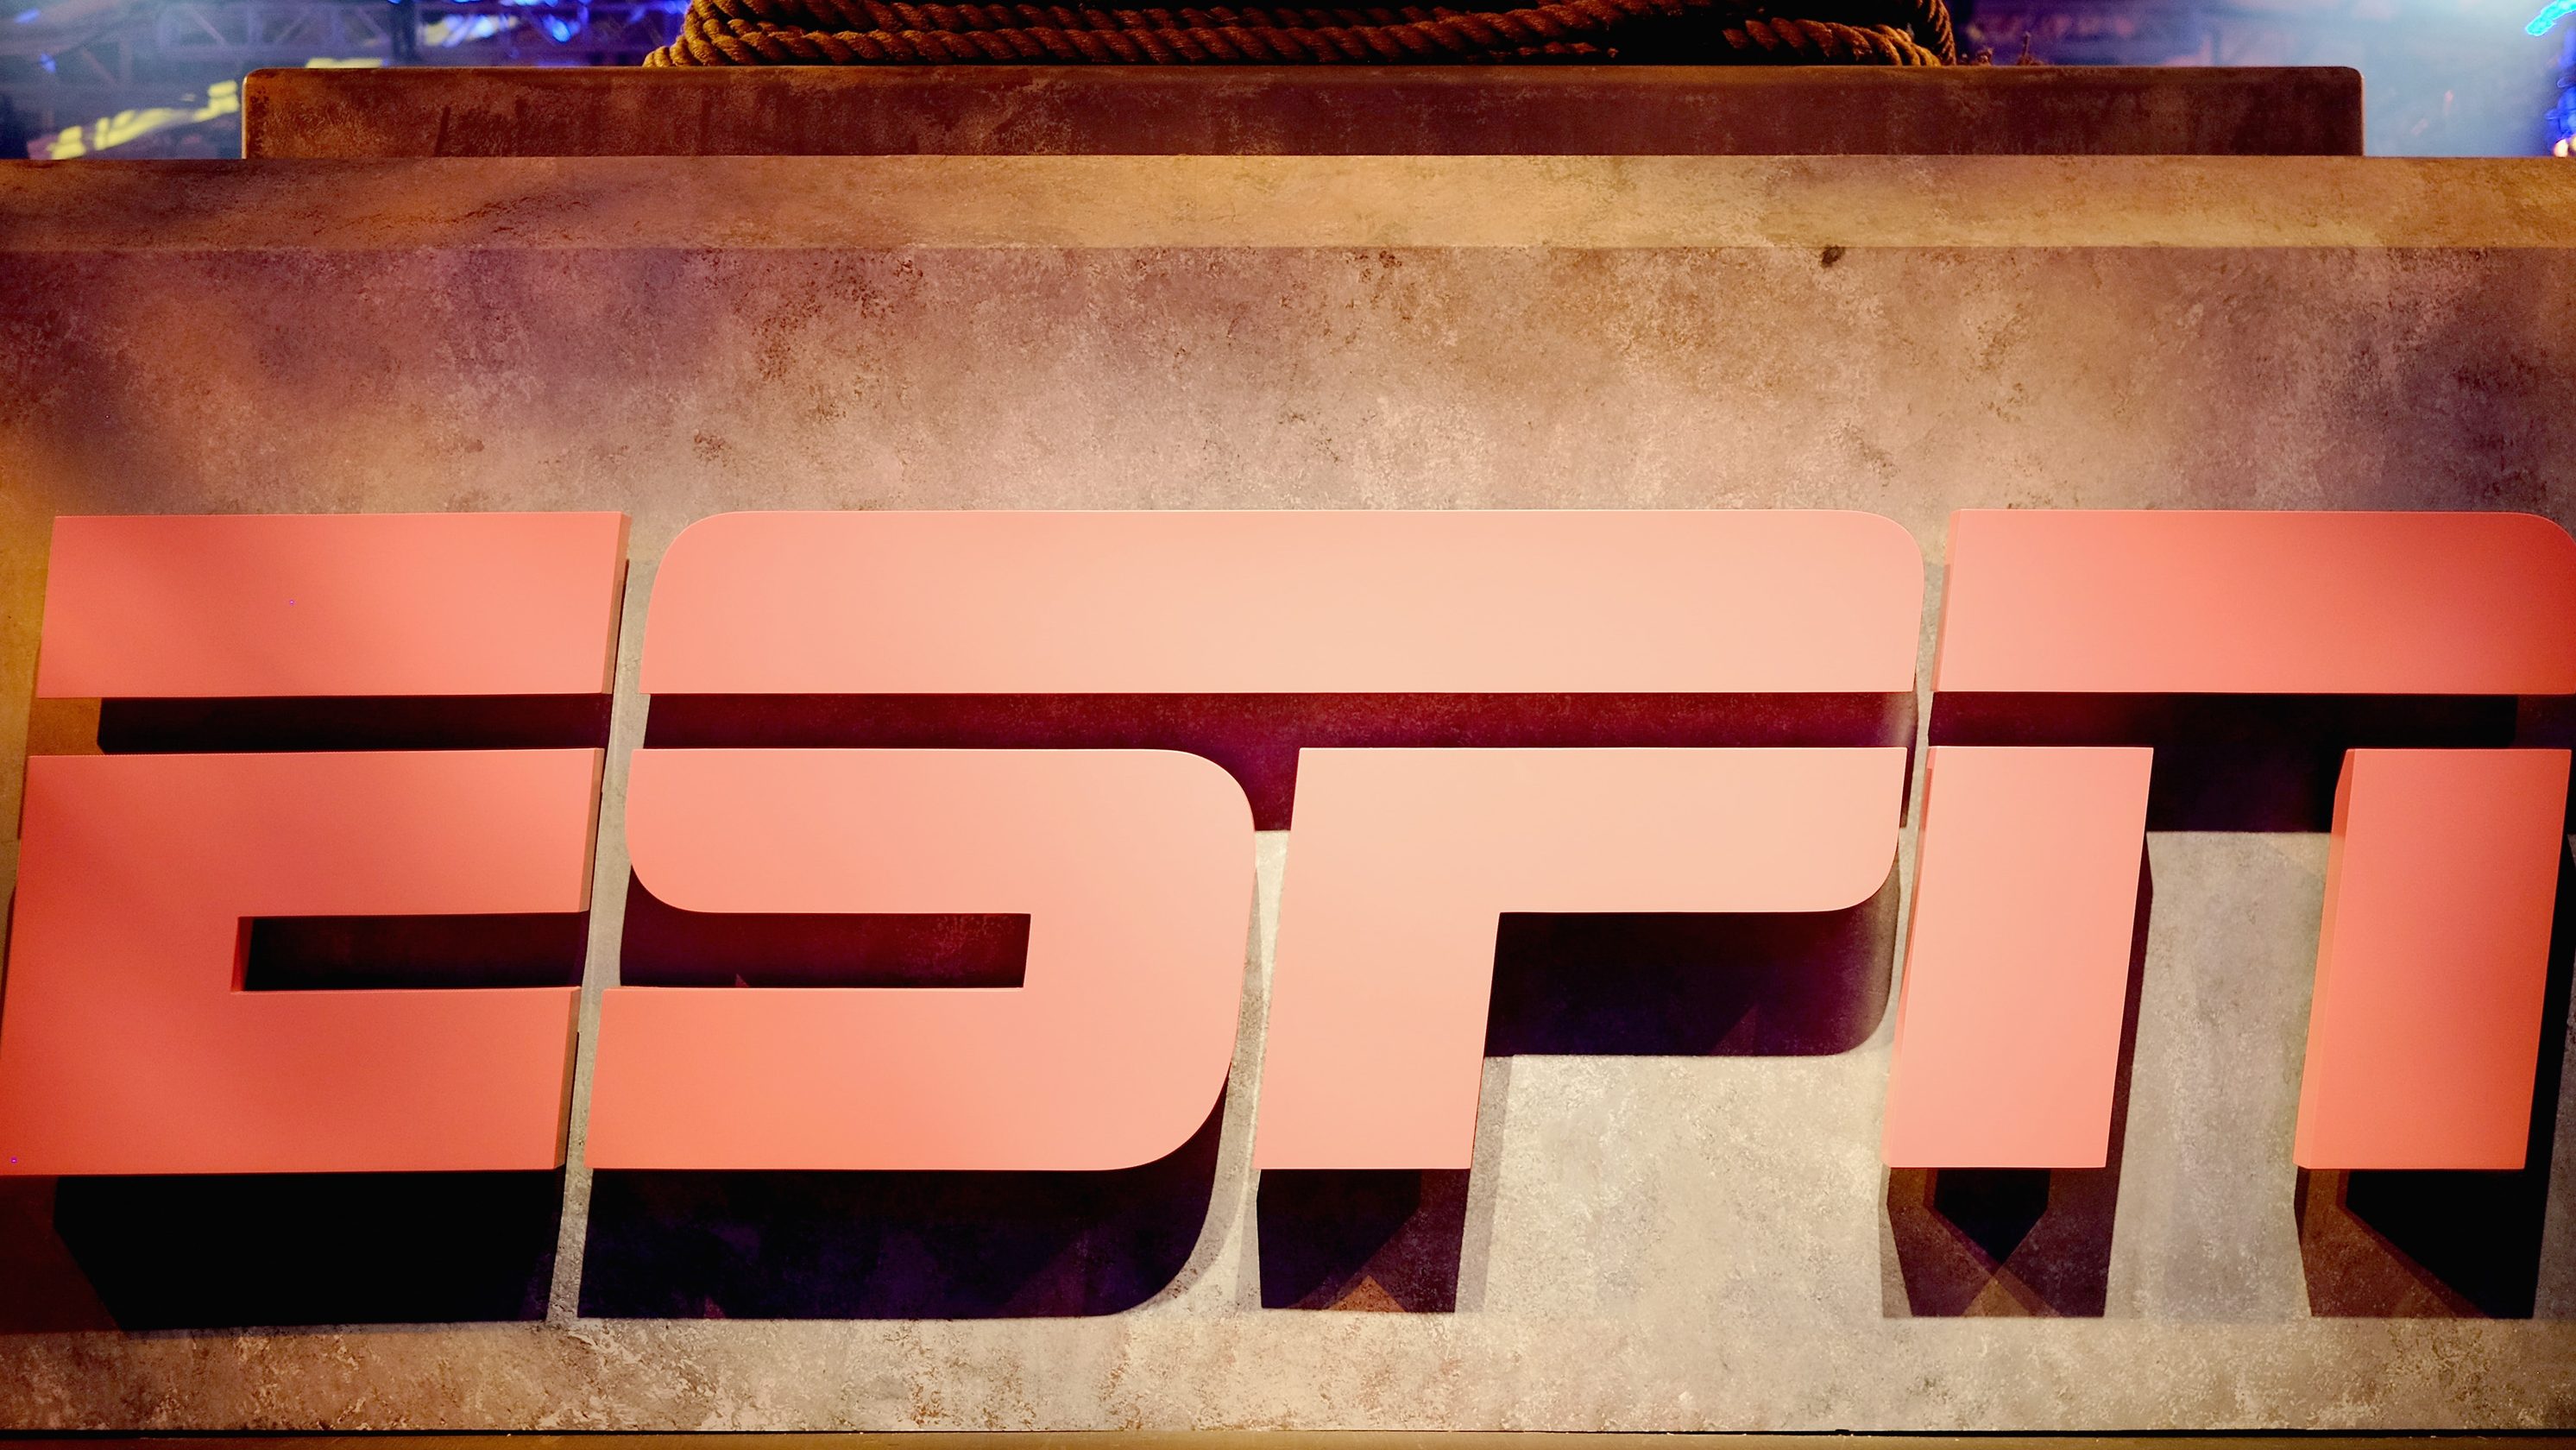 download how to watch espn without cable